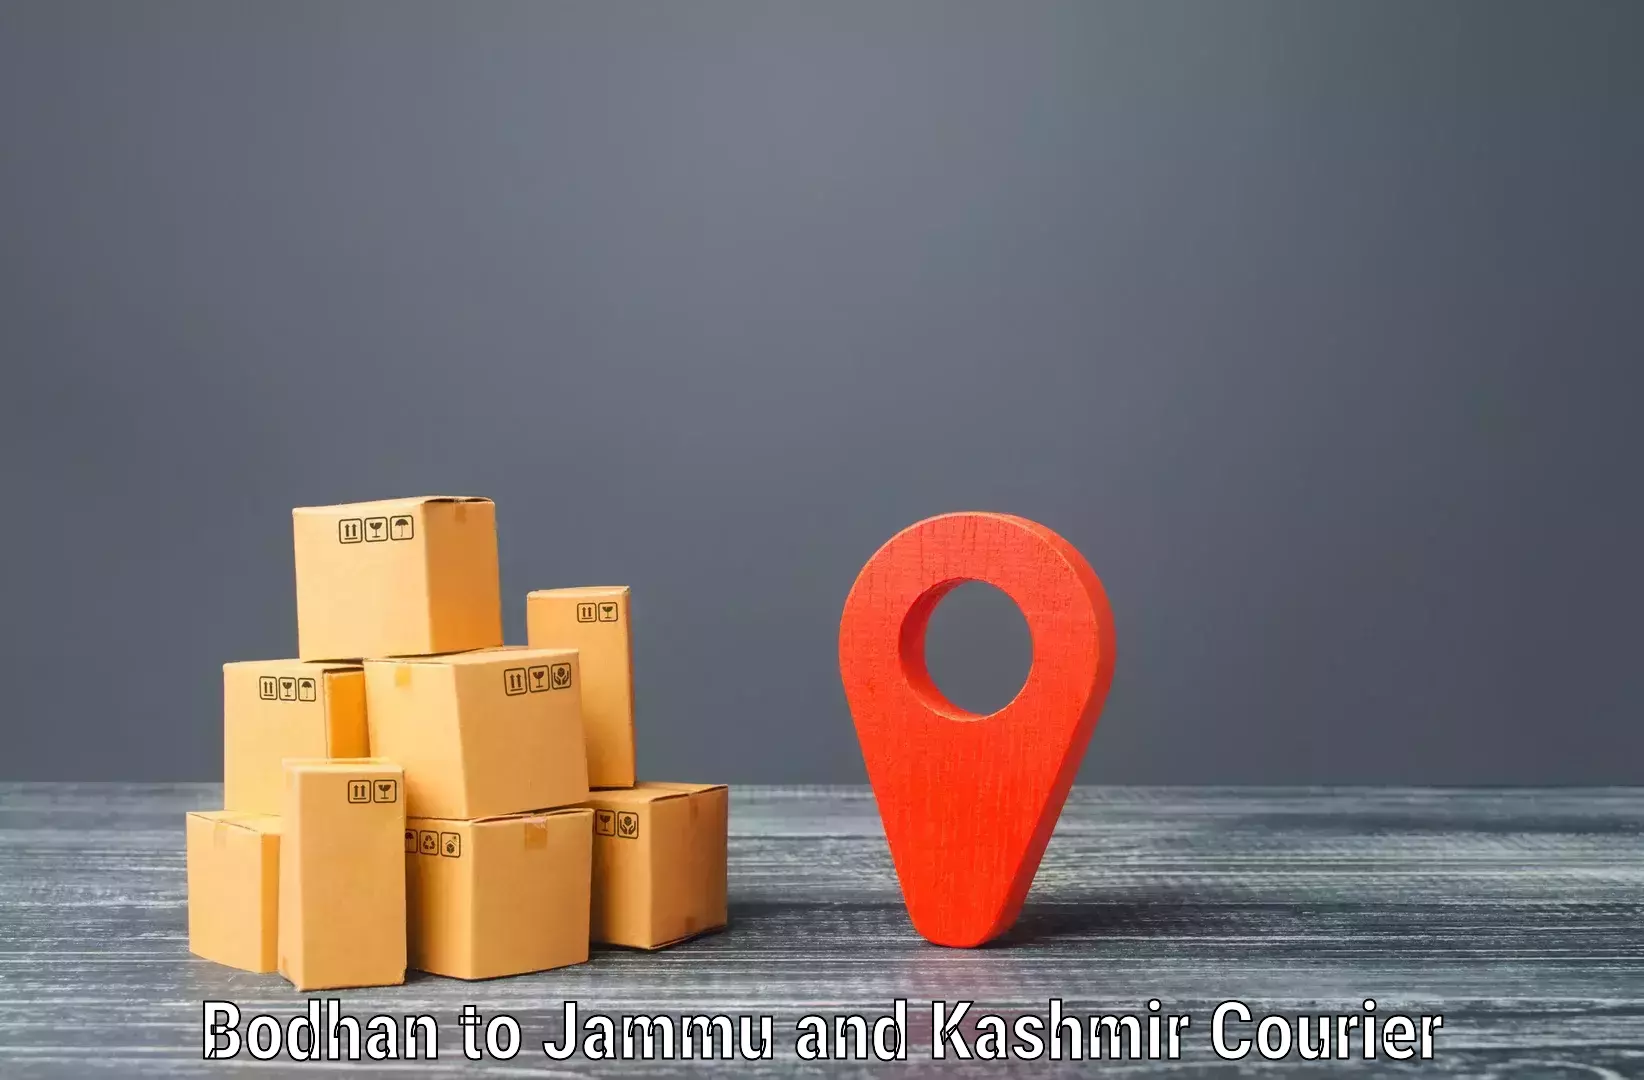 Automated parcel services Bodhan to Udhampur